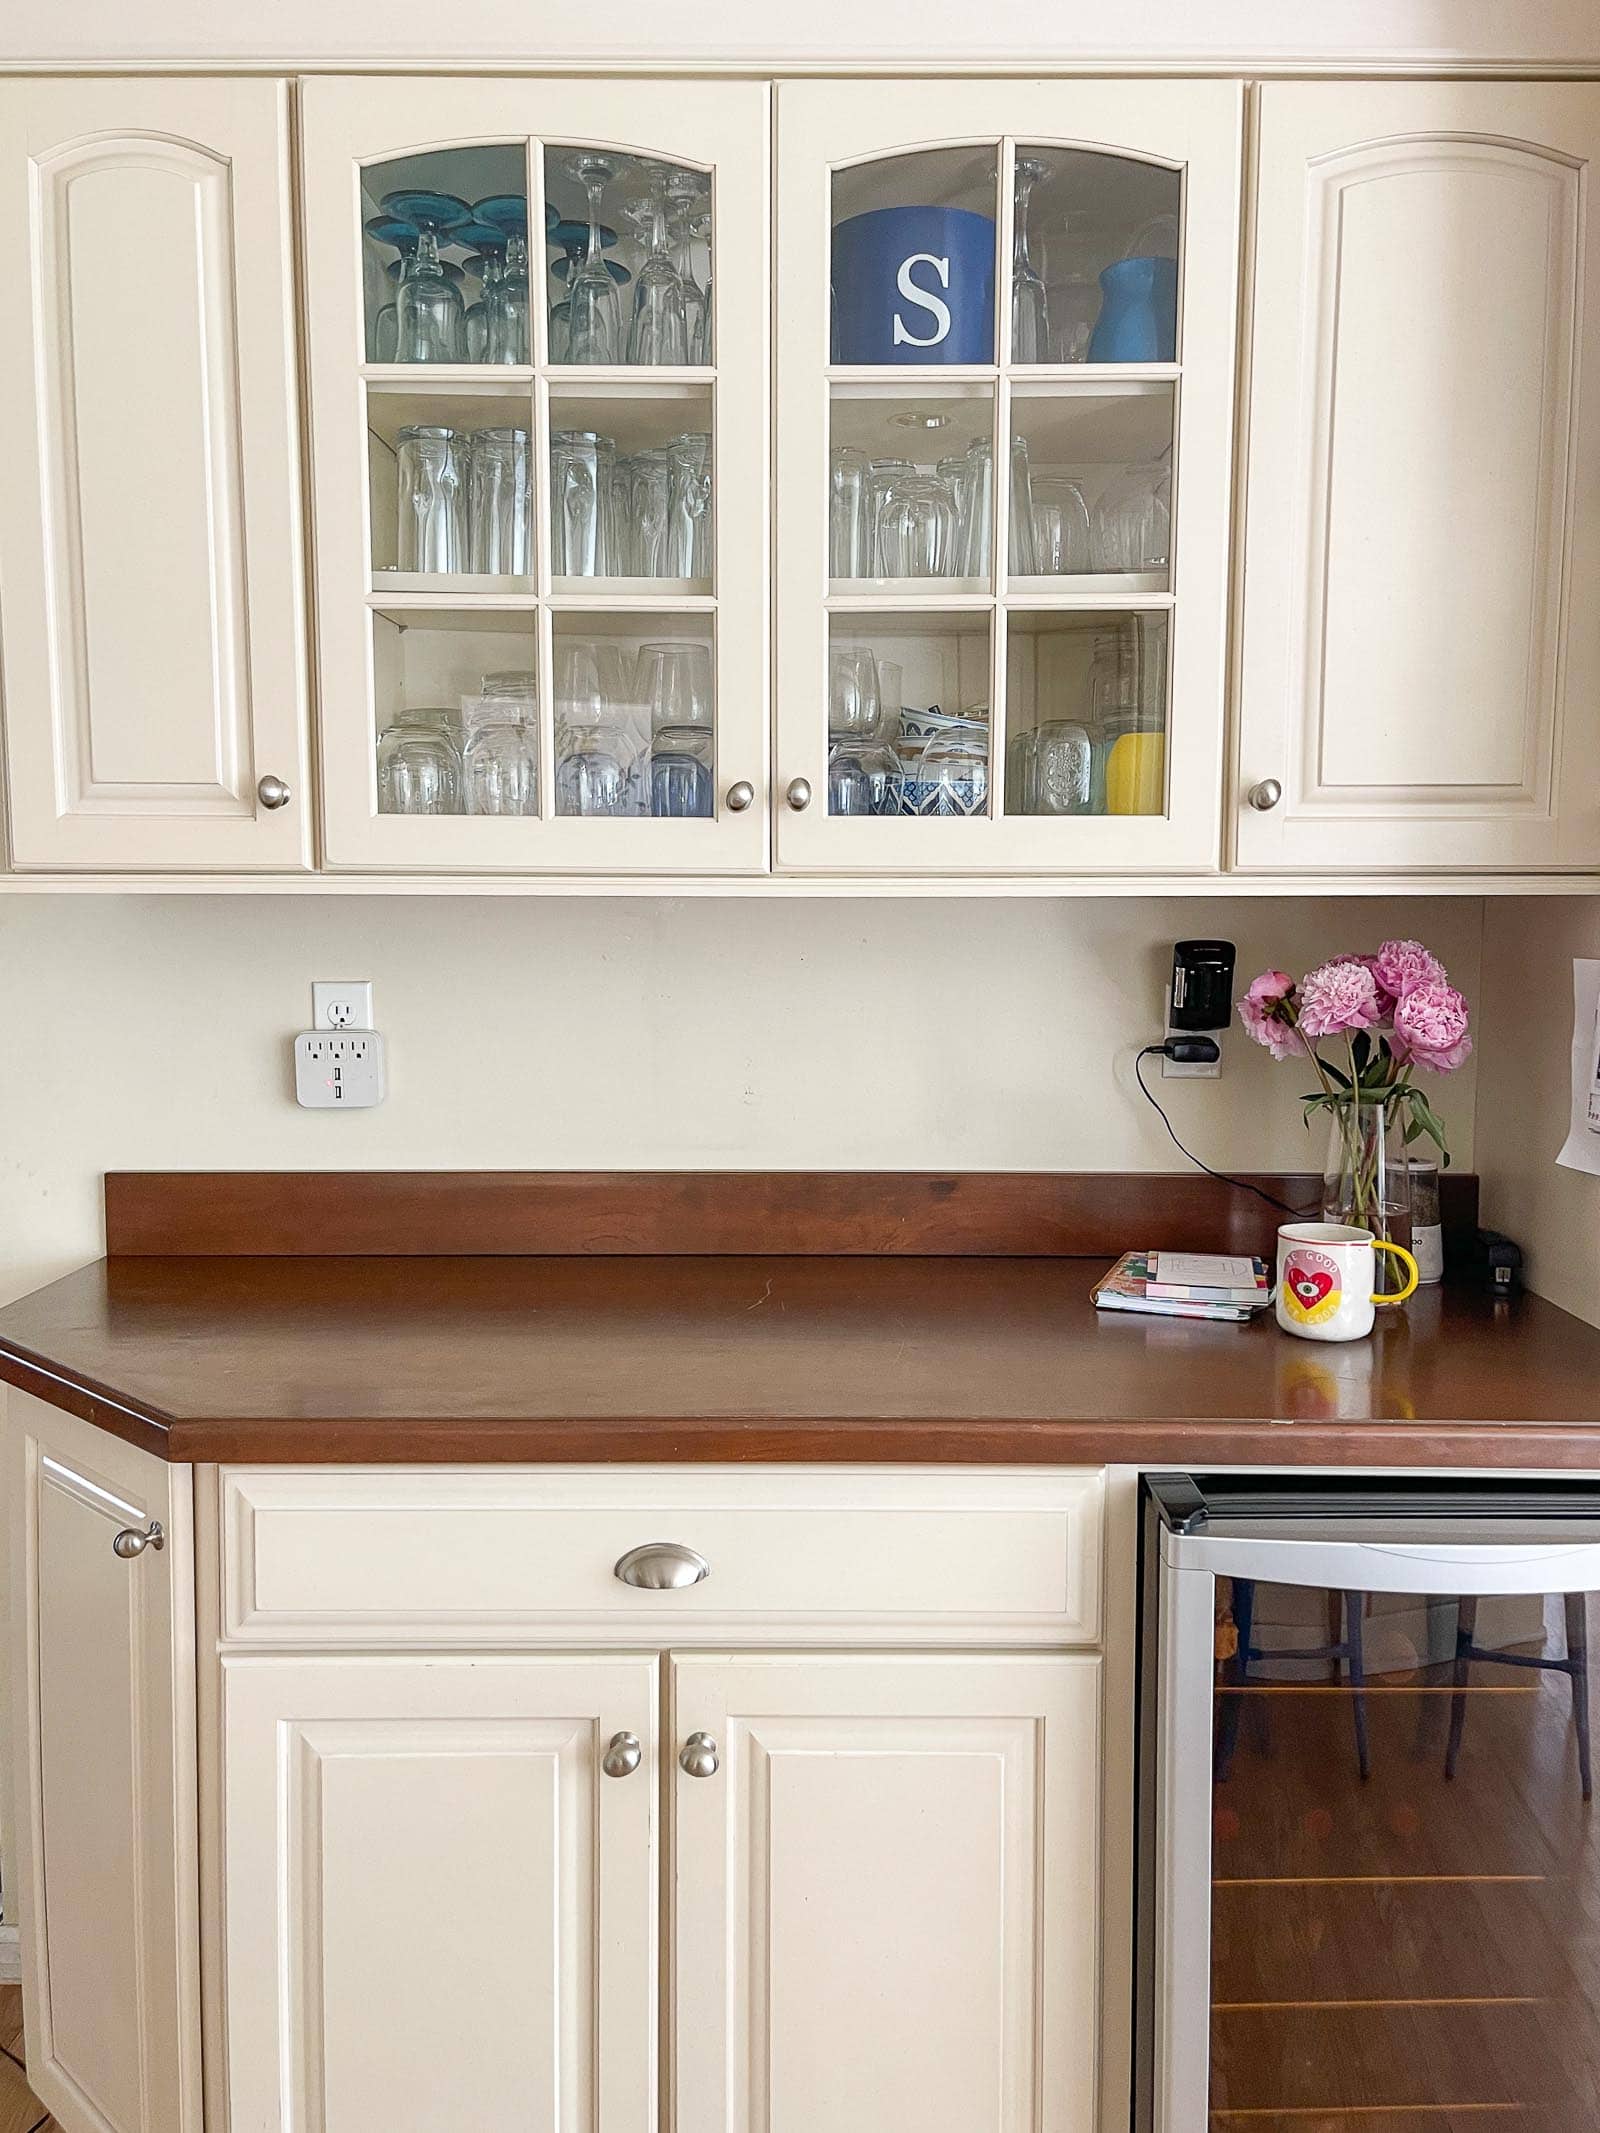 wooden side counters in kitchen